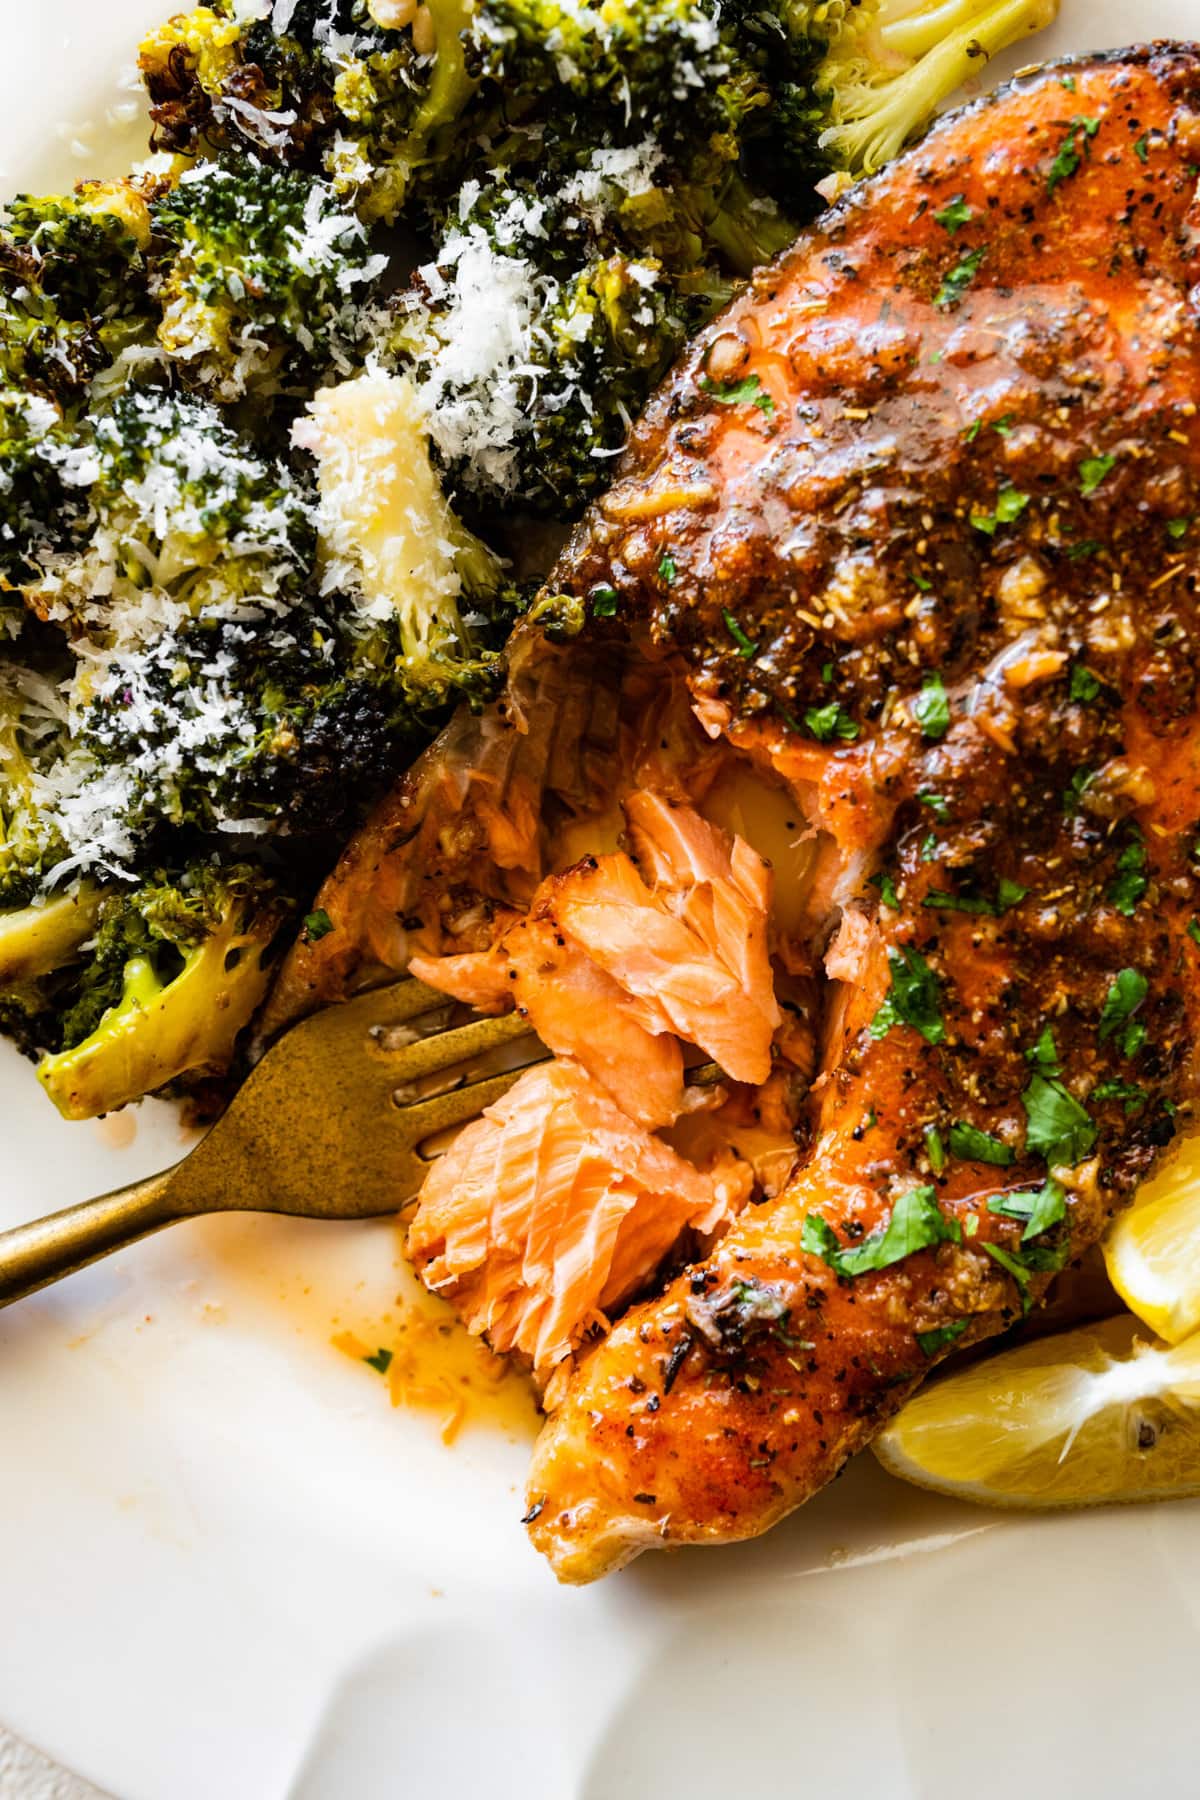 A plate with the easy oven baked salmon steaks recipe with roasted broccoli on the side. A bite taken out of the salmon.